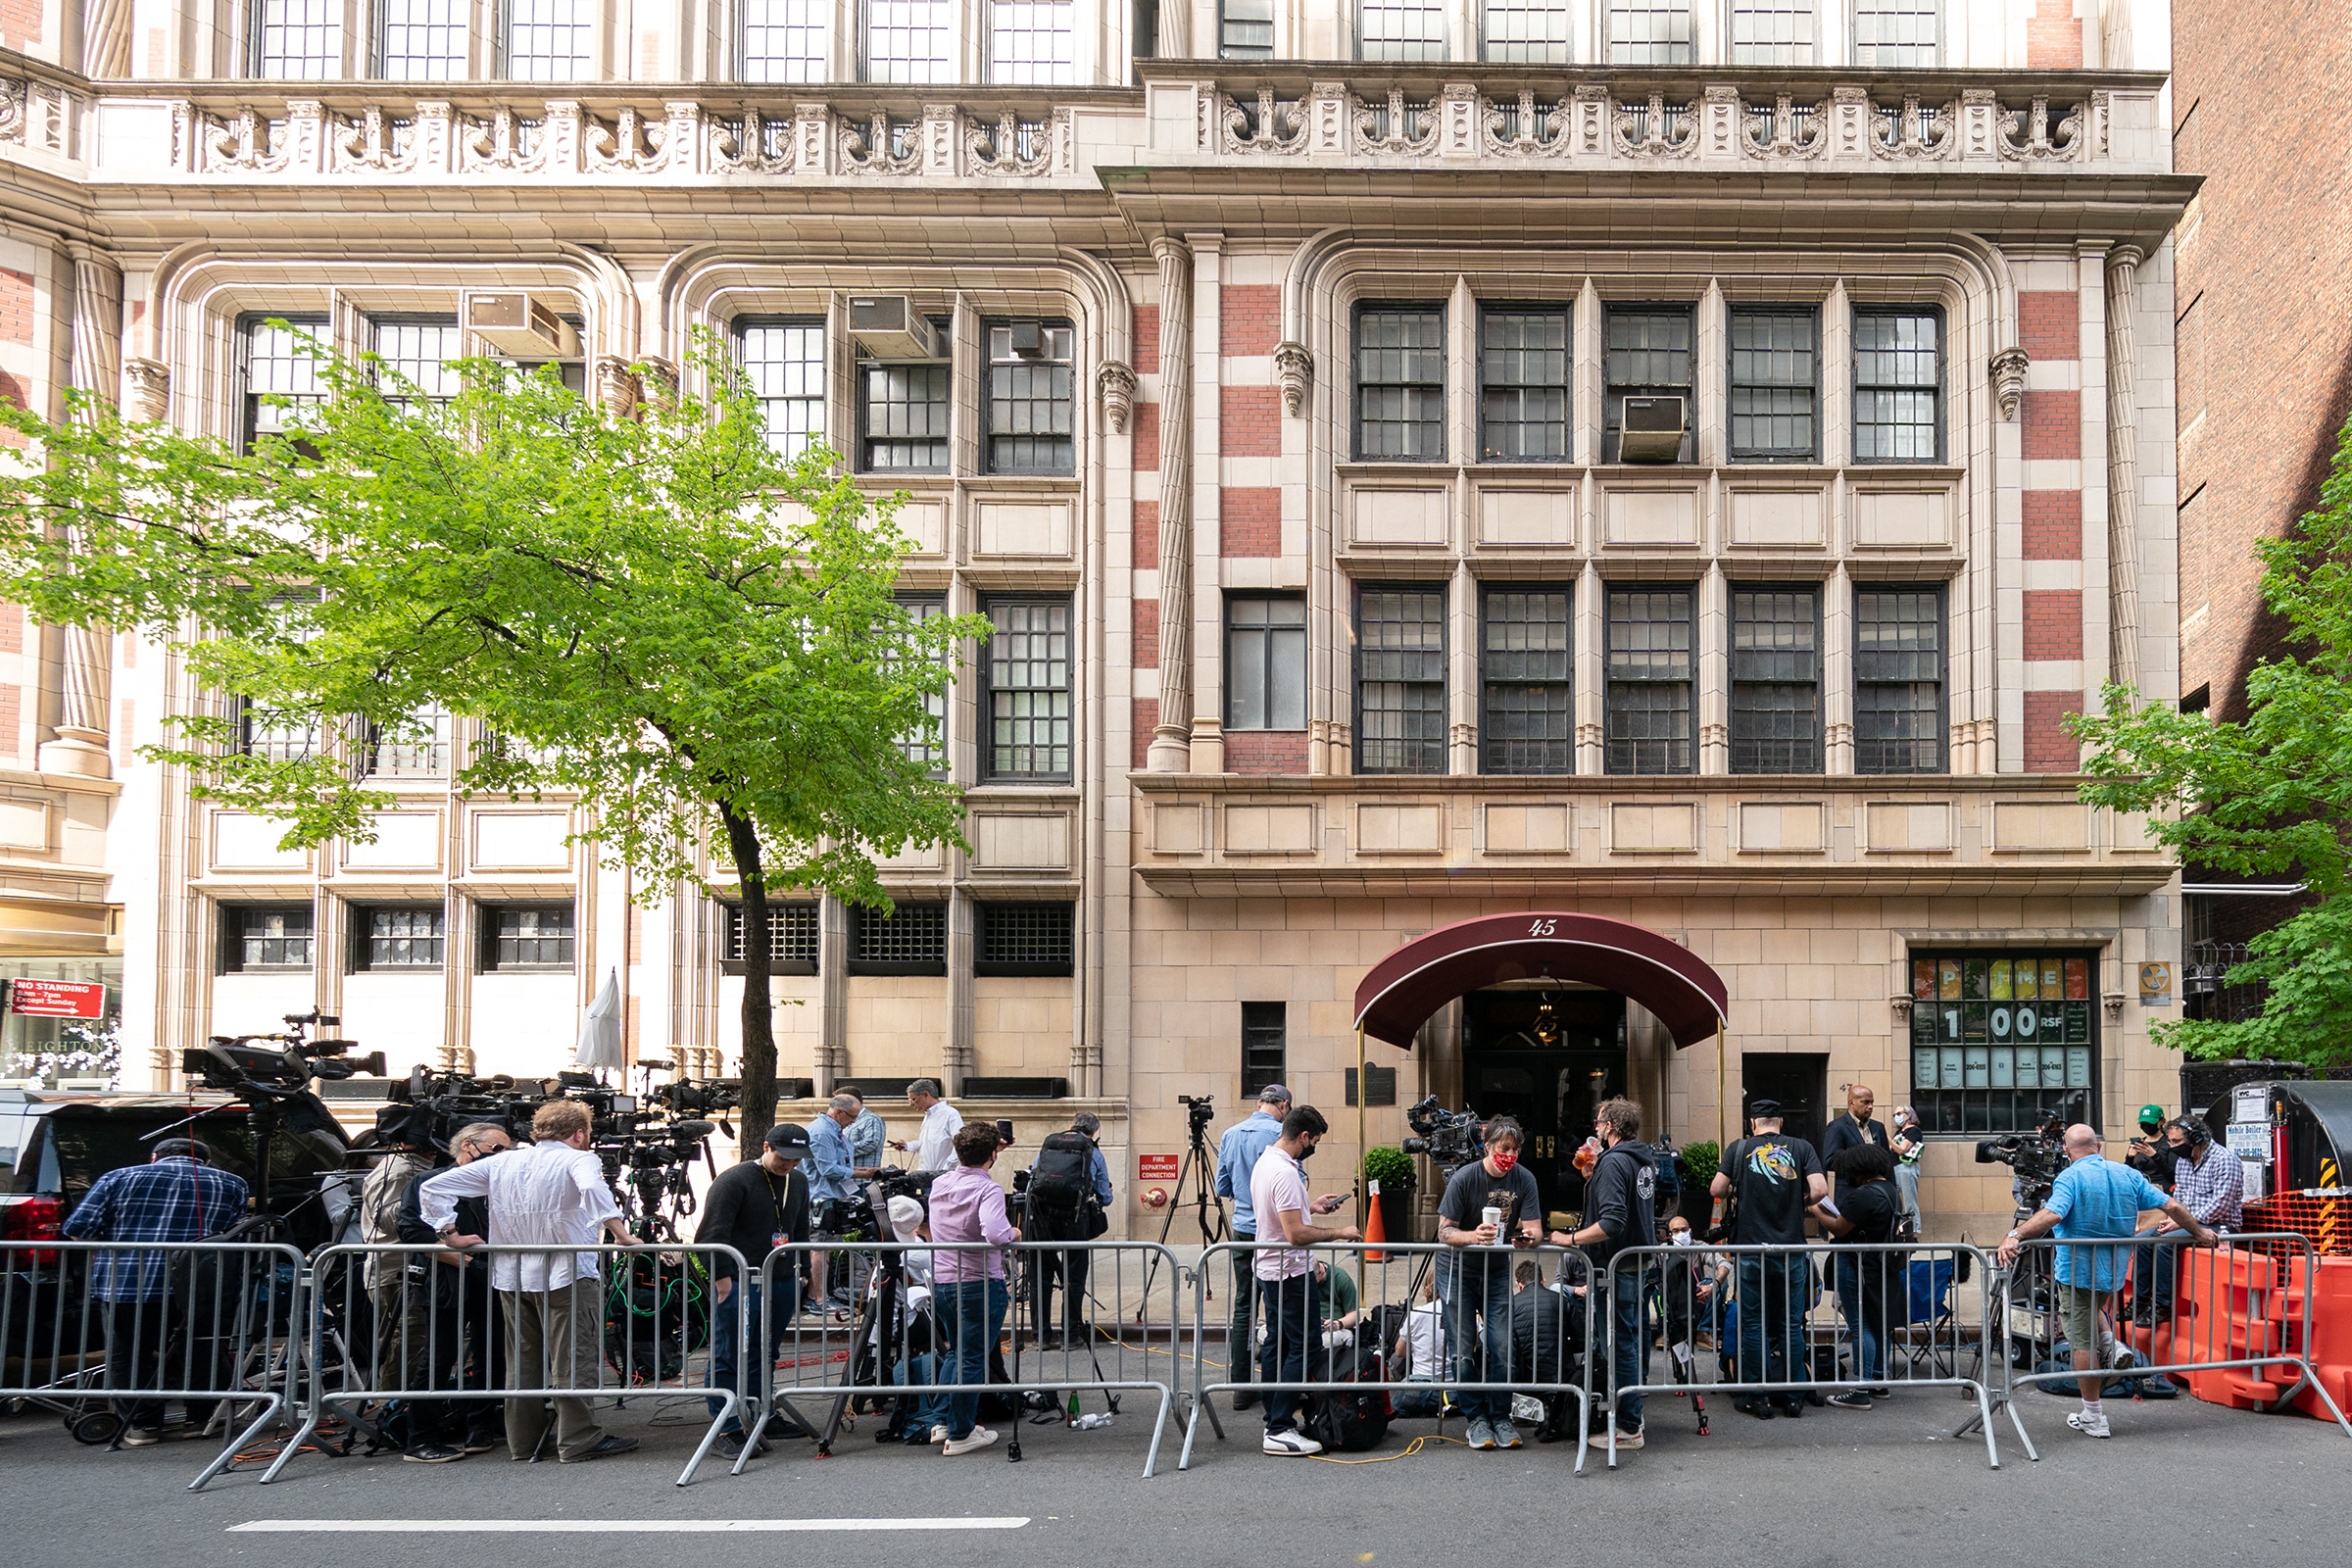 After the Giuliani raid, members of the media gathered outside the Manhattan building on April 28, 2021. (Jeenah Moon—The New York Times/Redux)